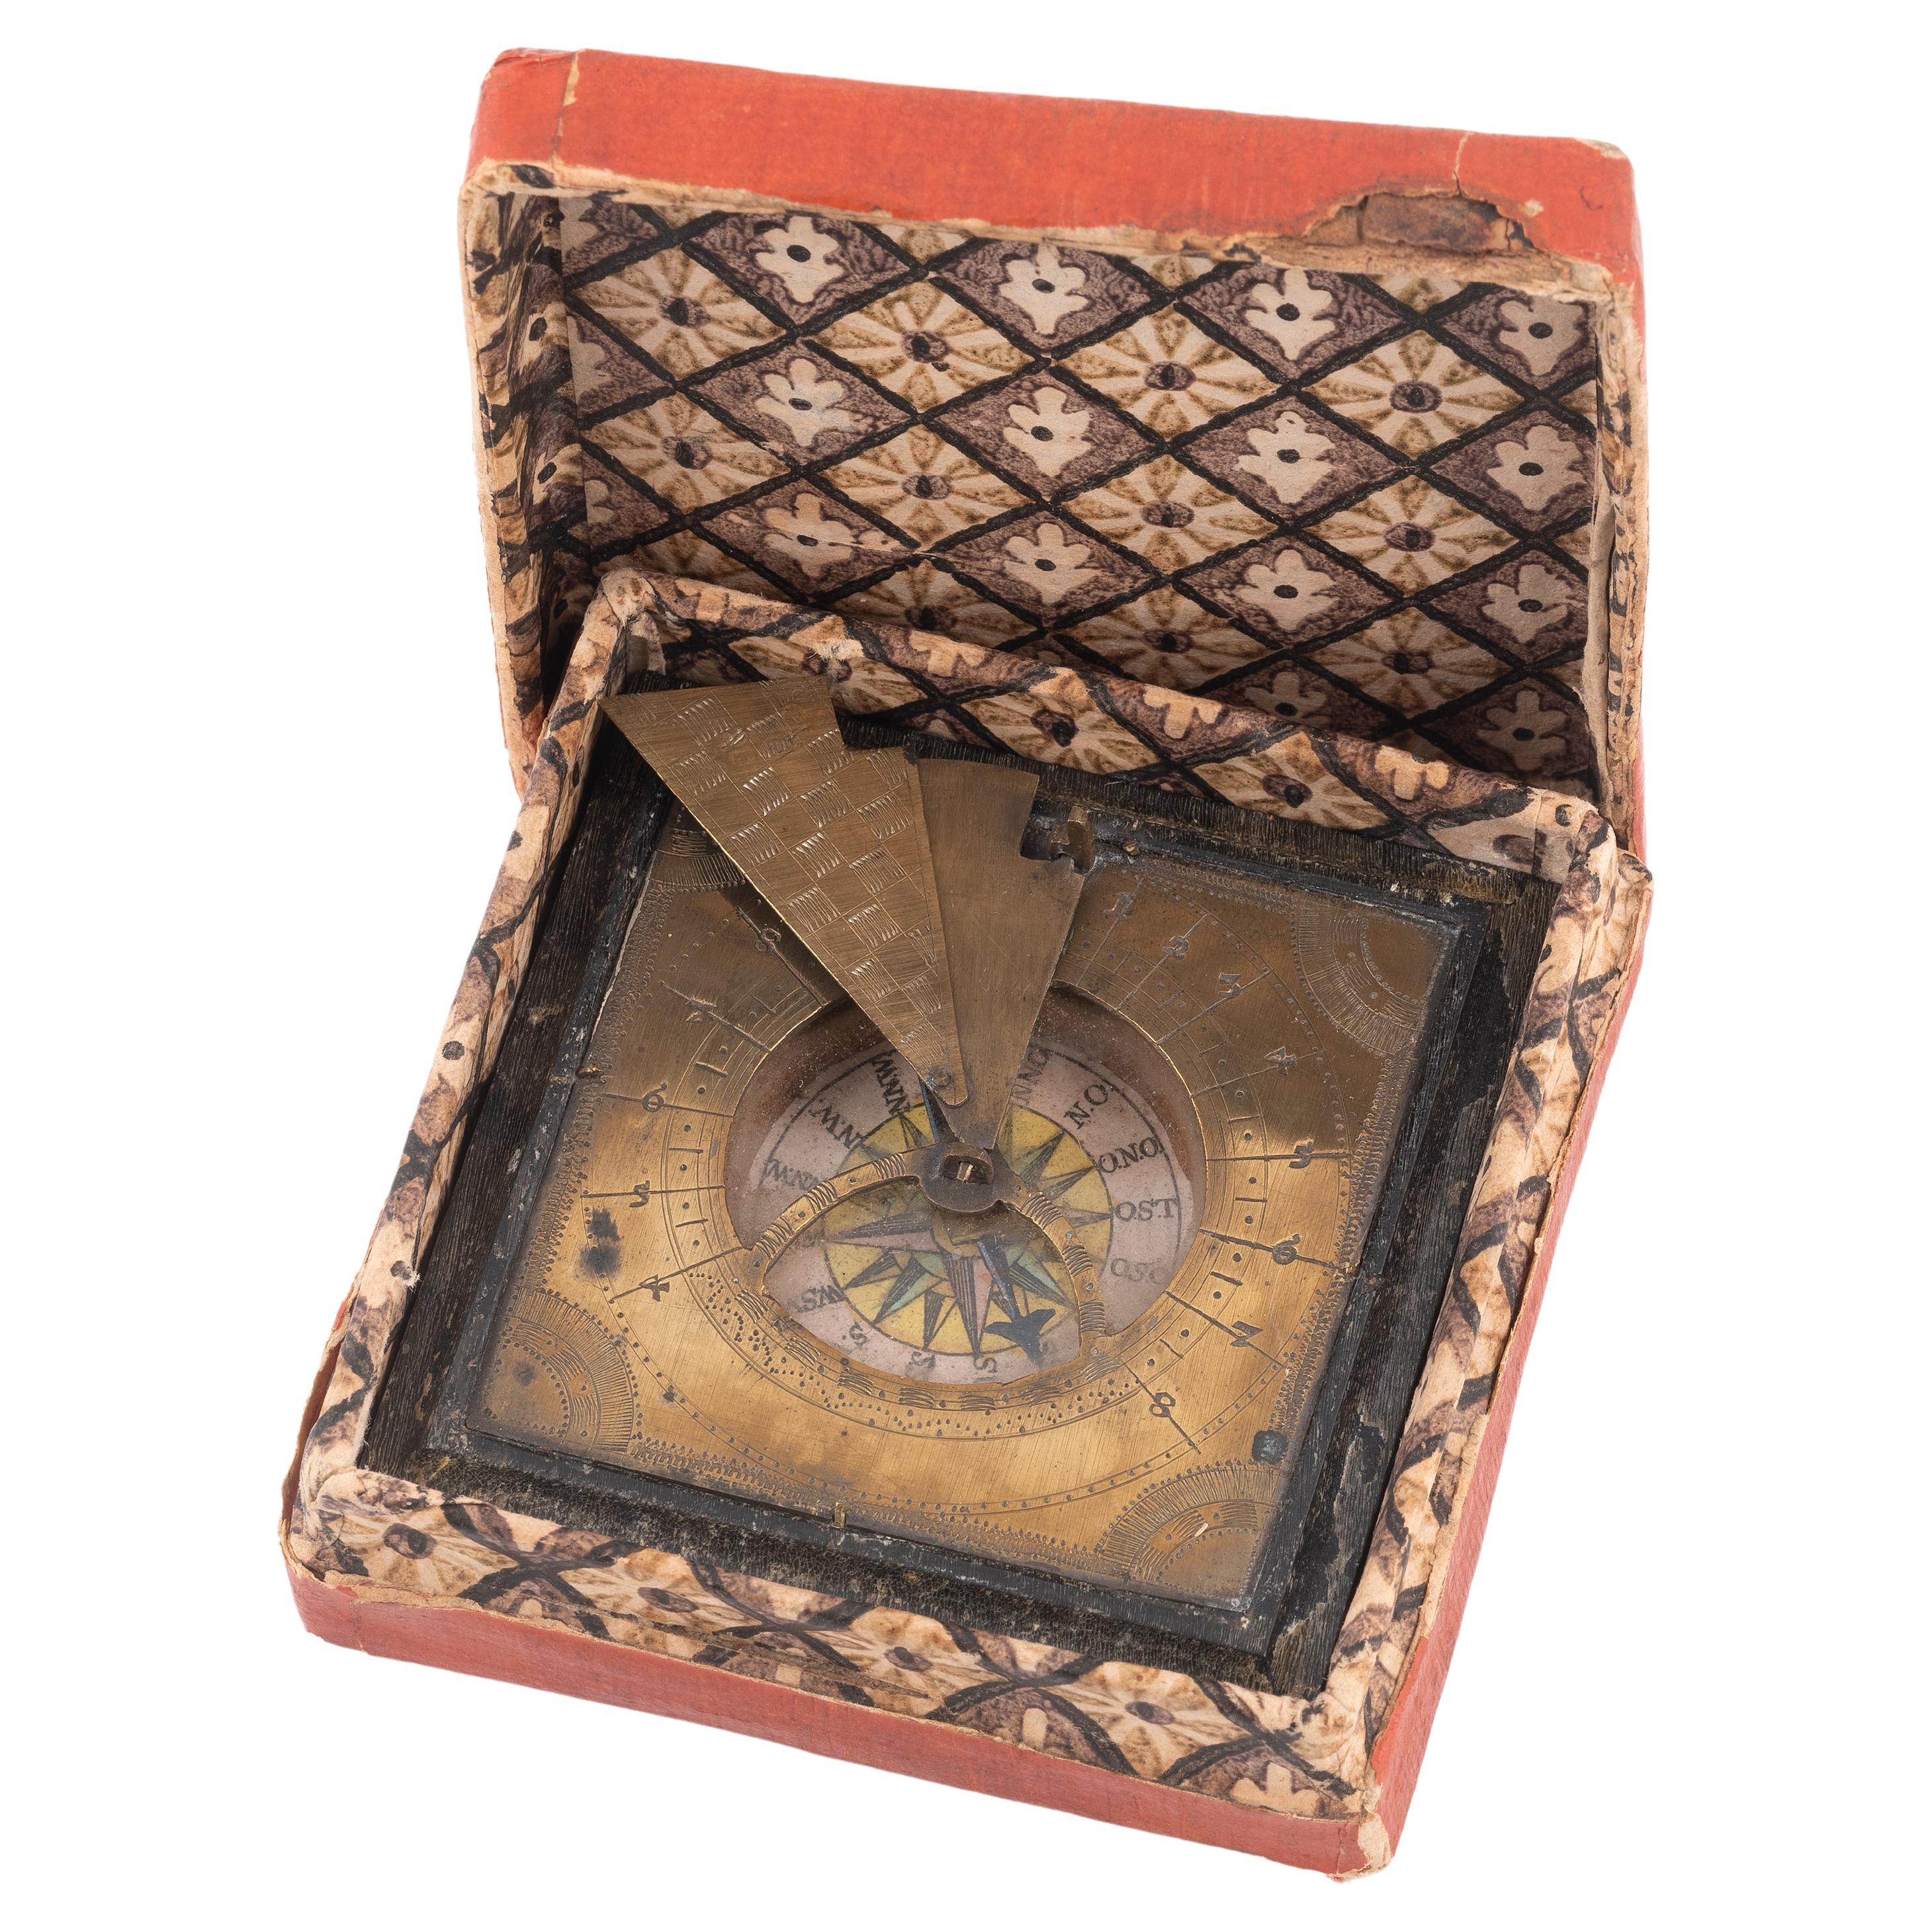 Shipping policy
No additional costs will be added to this order.
Shipping costs will be totally covered by the seller (customs duties included). 

Brass sundial with folding gnoman. Wood painted base holds a needle compass over paper dial. Circa